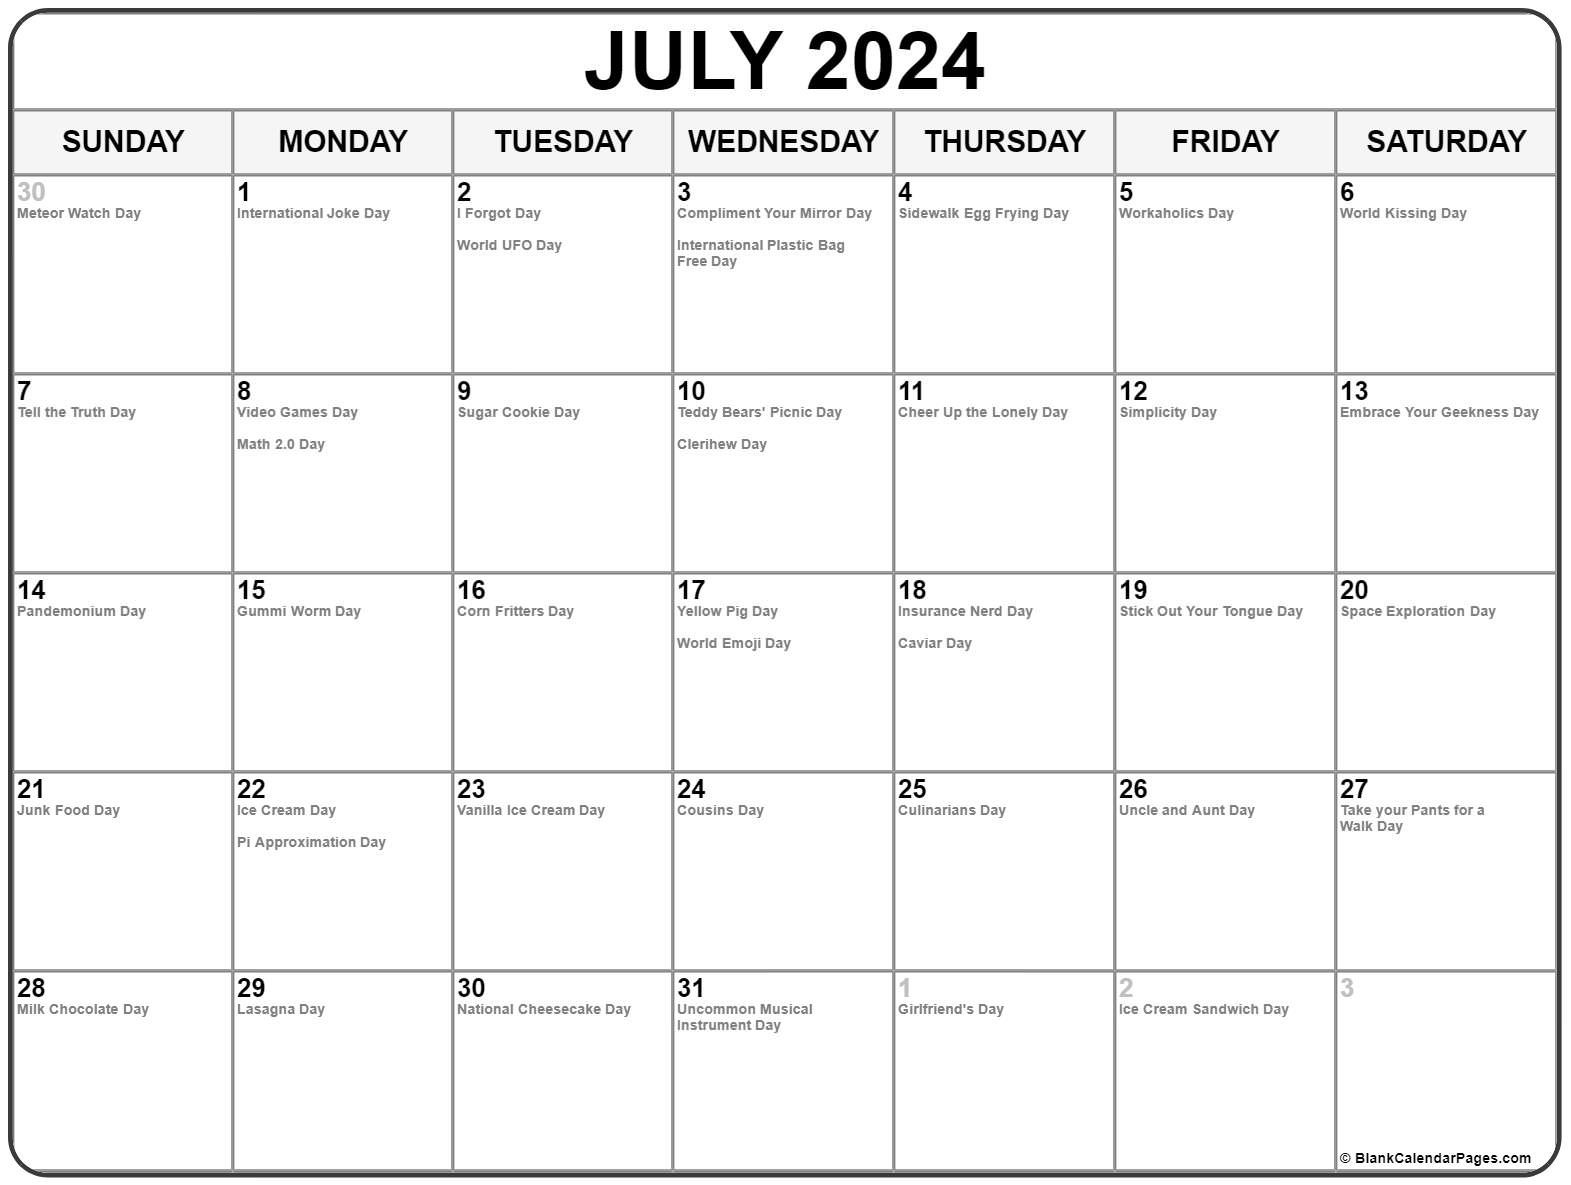 July 2024 With Holidays Calendar | July Calendar With Special Days 2024